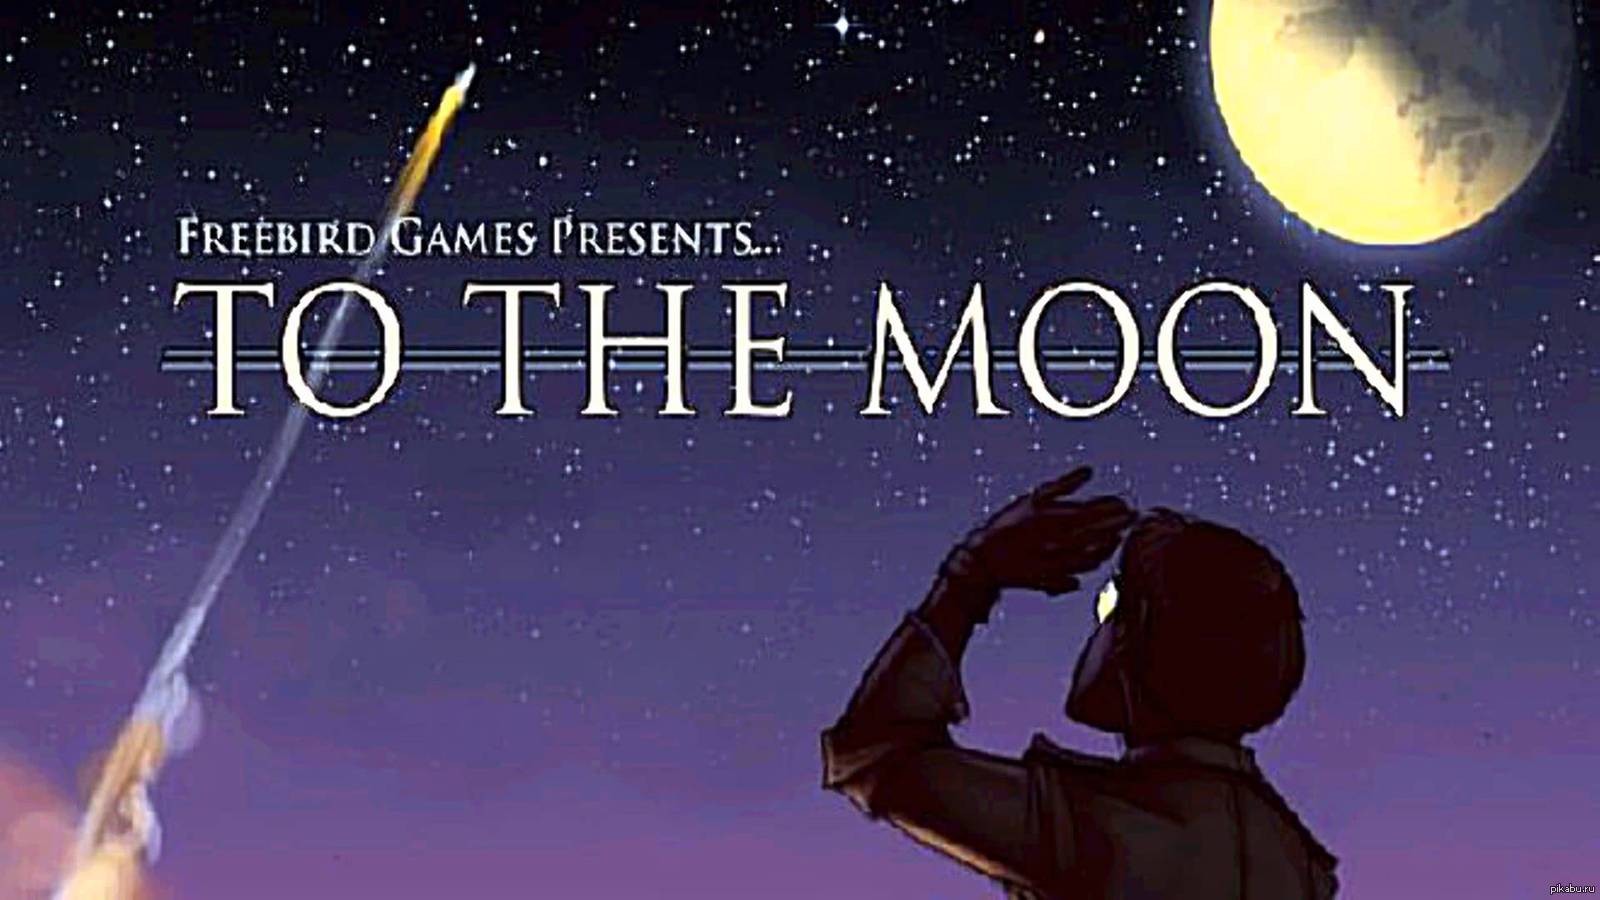 Races the moon. To the Moon. The Moon игра. To the Moon game. To the Moon арты.